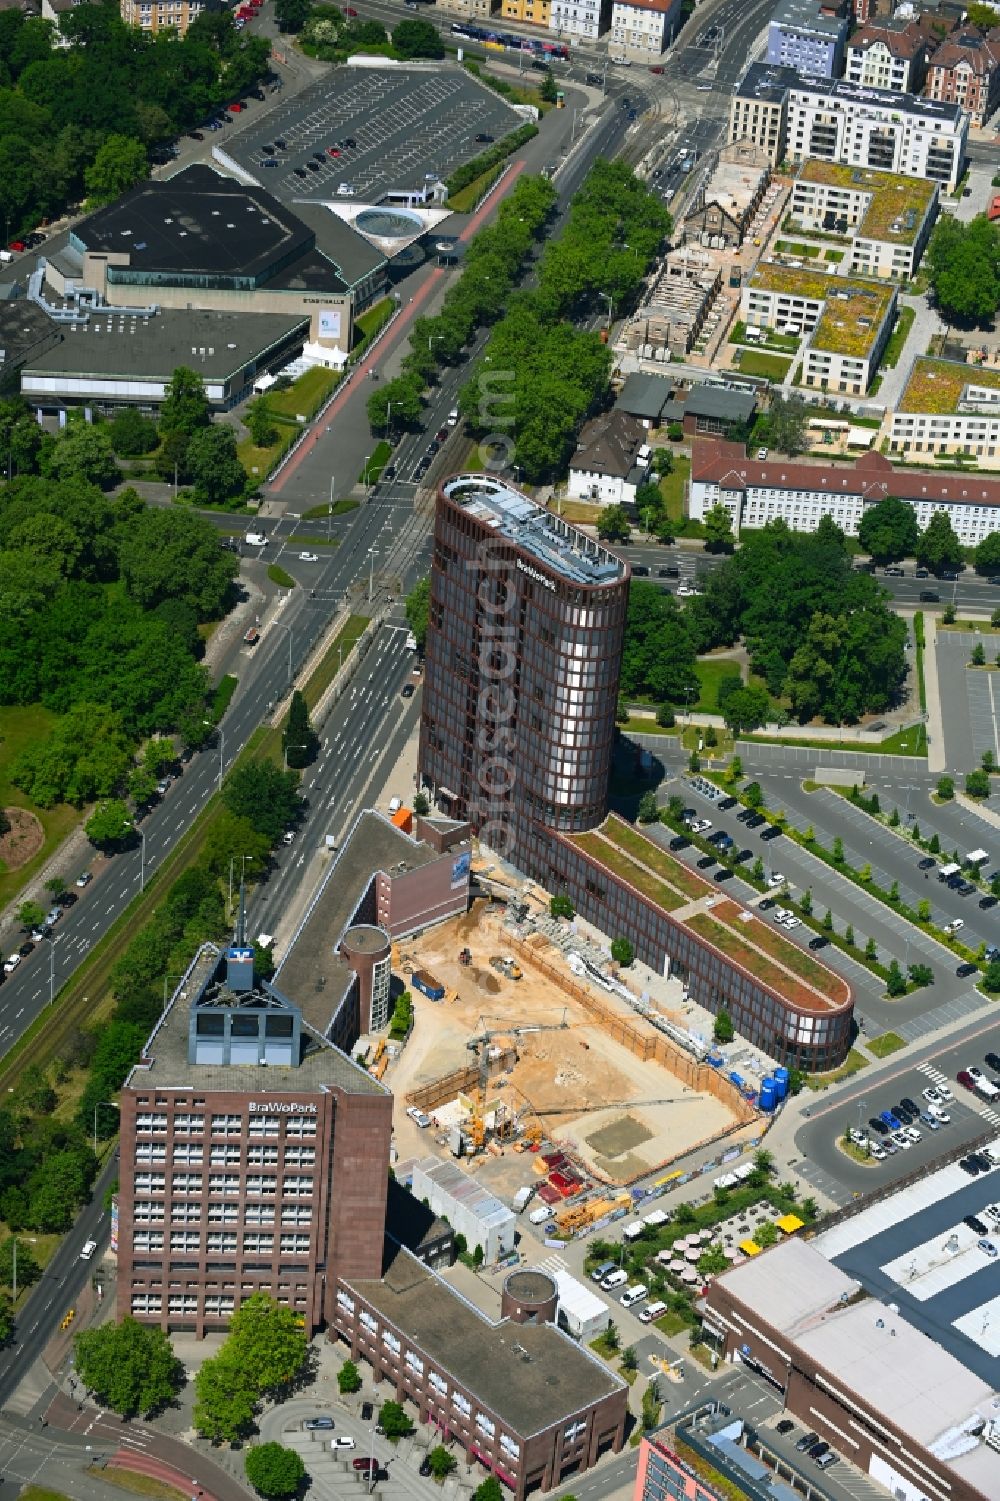 Braunschweig from the bird's eye view: Construction site of new Building on the skyscraper at BRAWOPARK of the Volksbank in Braunschweig in the state Lower Saxony